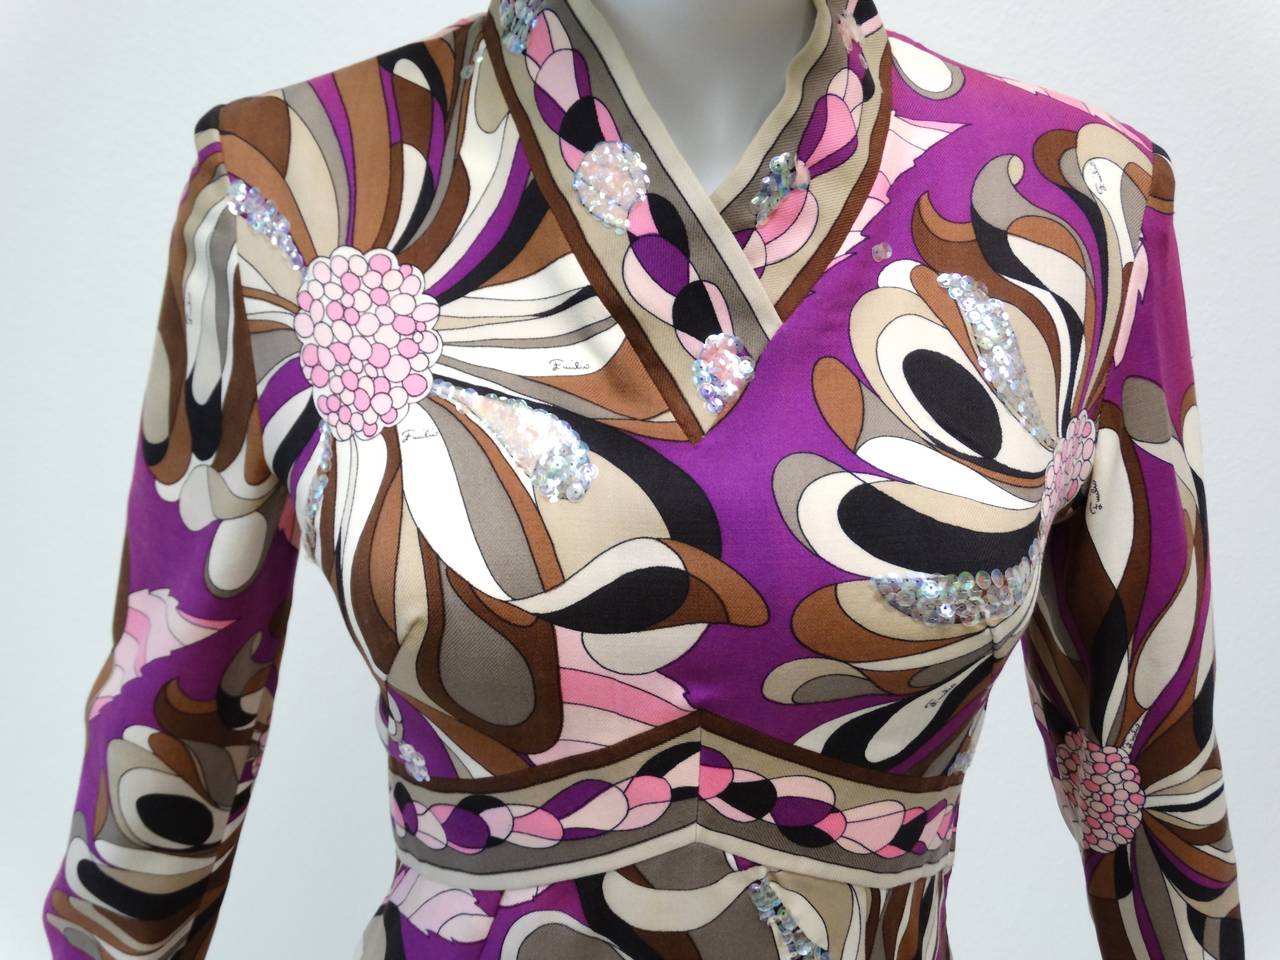 Women's 1960s Mod Emilio Pucci Wool Dress with Sequins